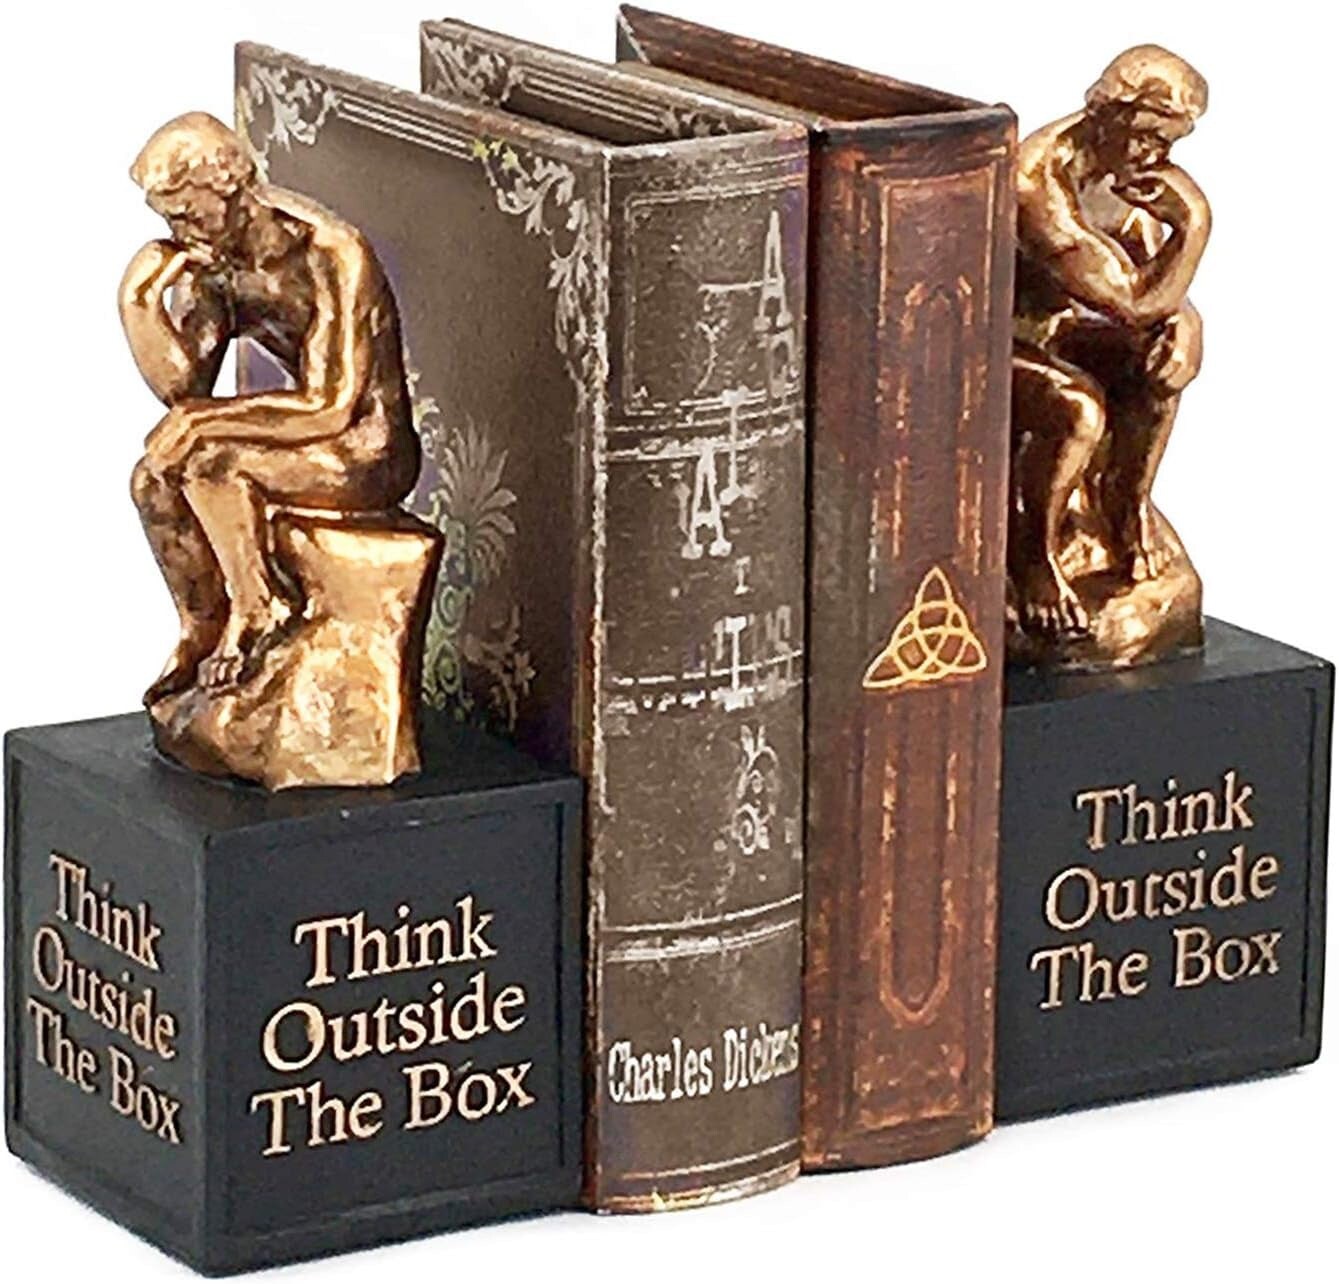 Rodin&#x27;S Thinker Bookends Vintage Cool Creative Idea outside the Box Cute Modern Abstract Sculpture Unique Book Ends Holder Stopper Library Shelves Aesthetic Boho Home Decor Accents